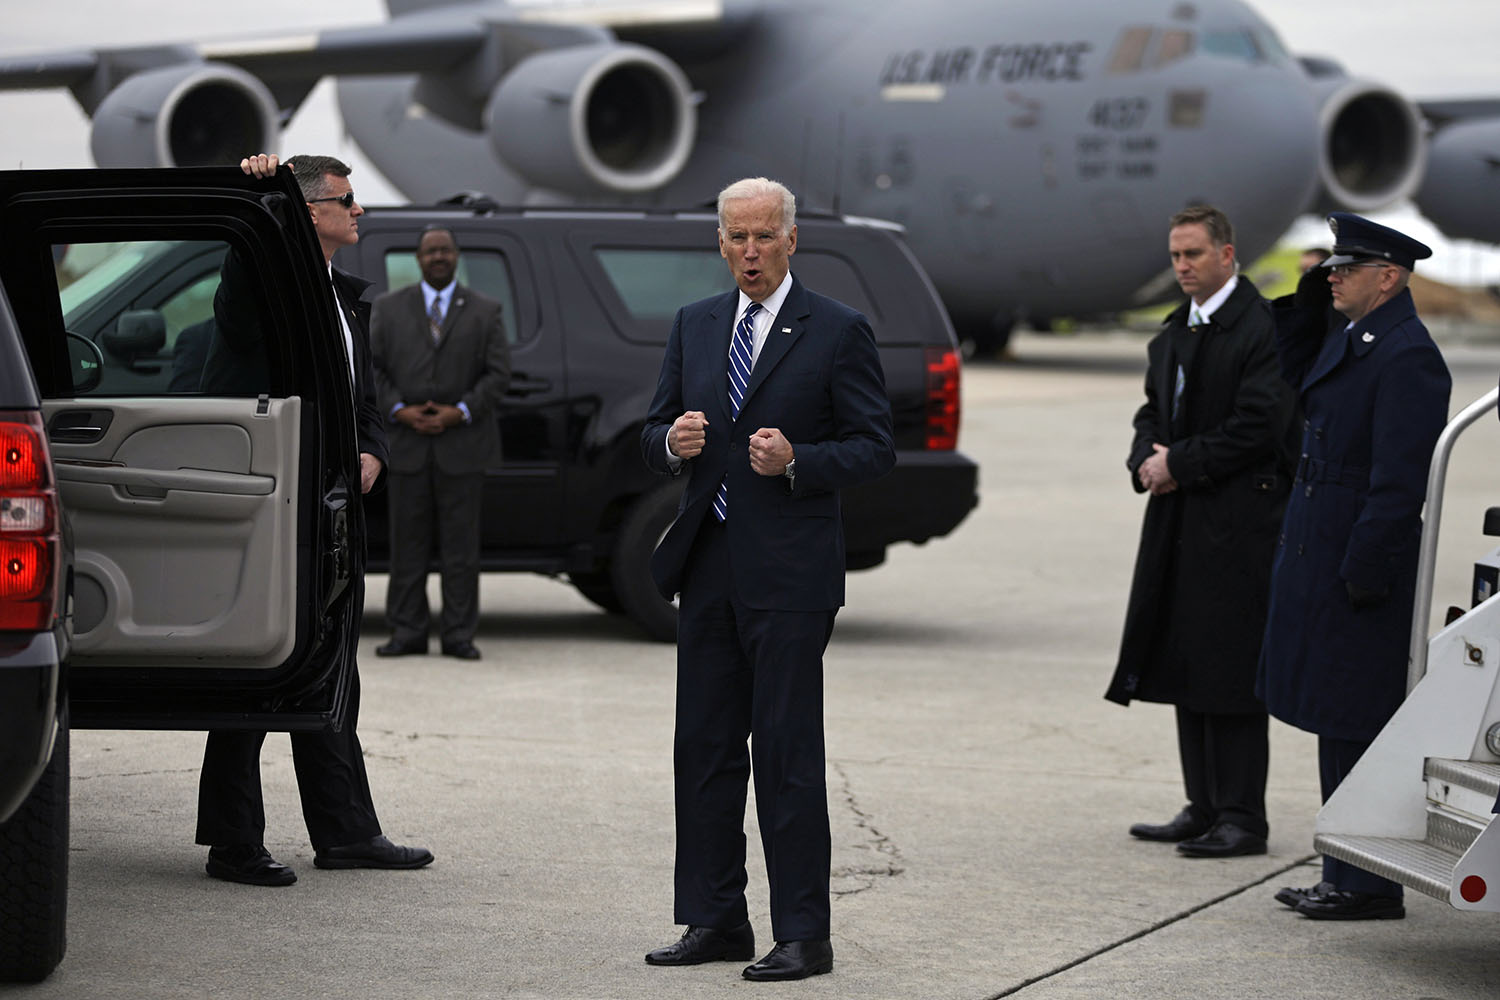 Mar. 4, 2014. Vice President Joe Biden remarks about the cold weather to the media after getting off the plane at Hartsfield-Jackson Atlanta International airport in Atlanta.